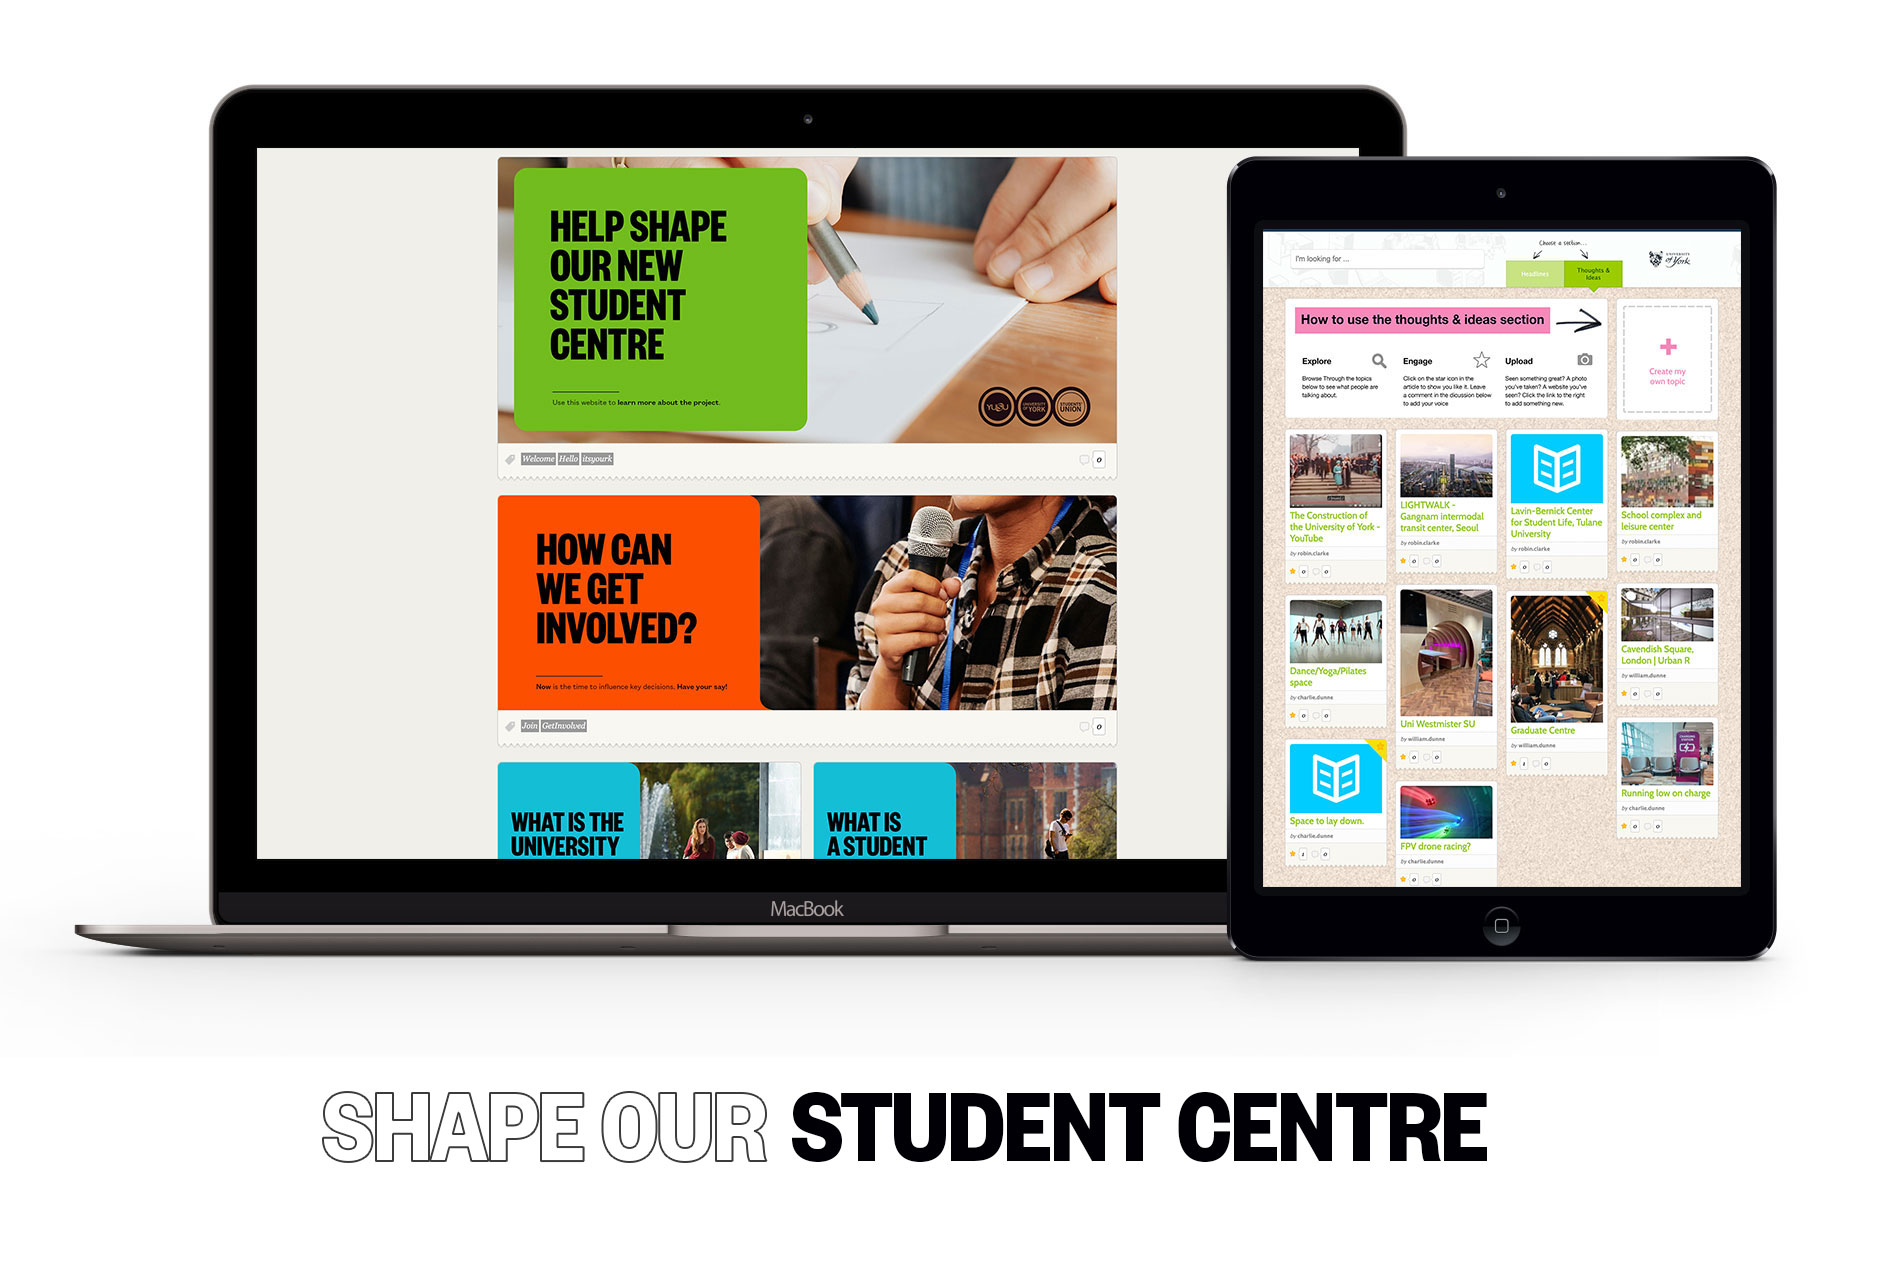 enter-your-email-address-for-access-to-the-york-student-centre-portal